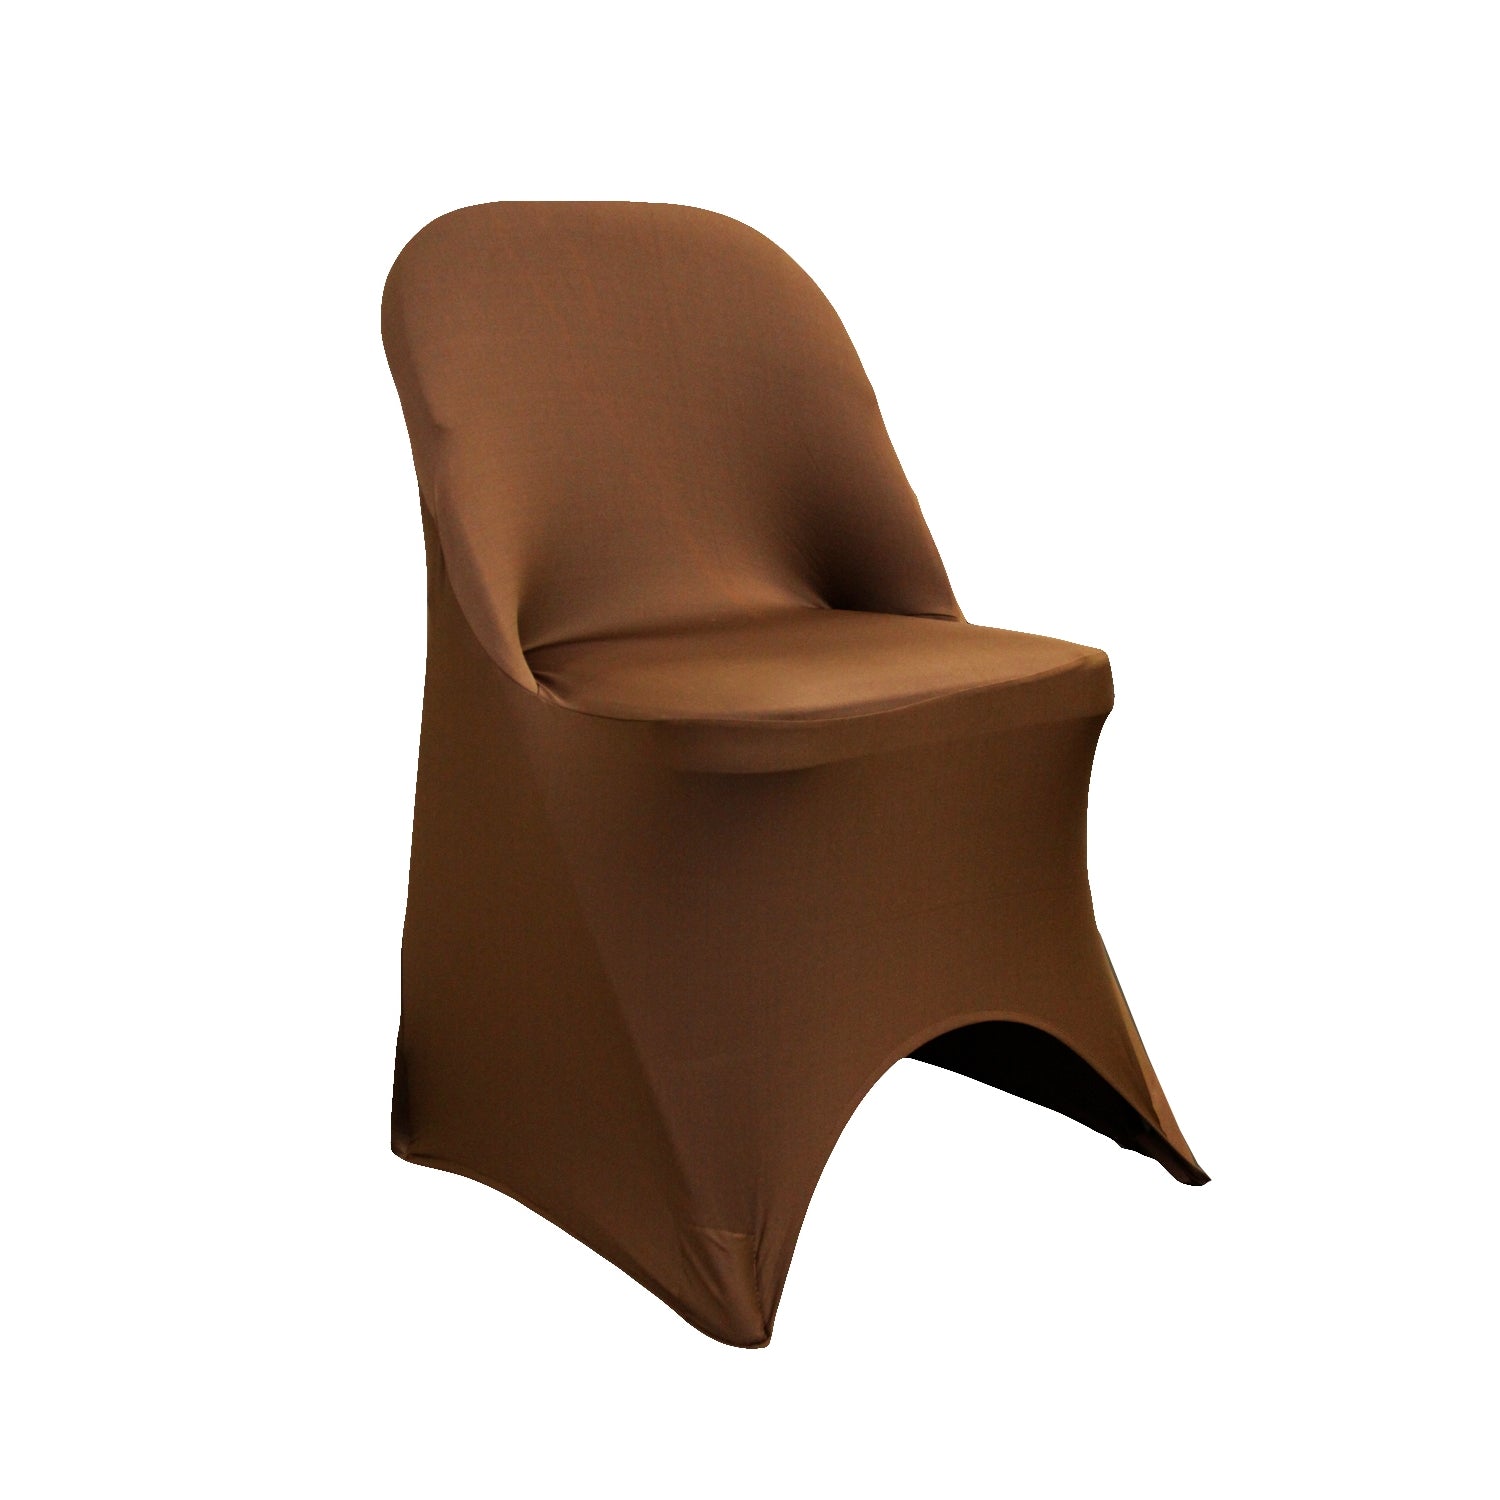 Folding Spandex Chair Cover - Chocolate Brown